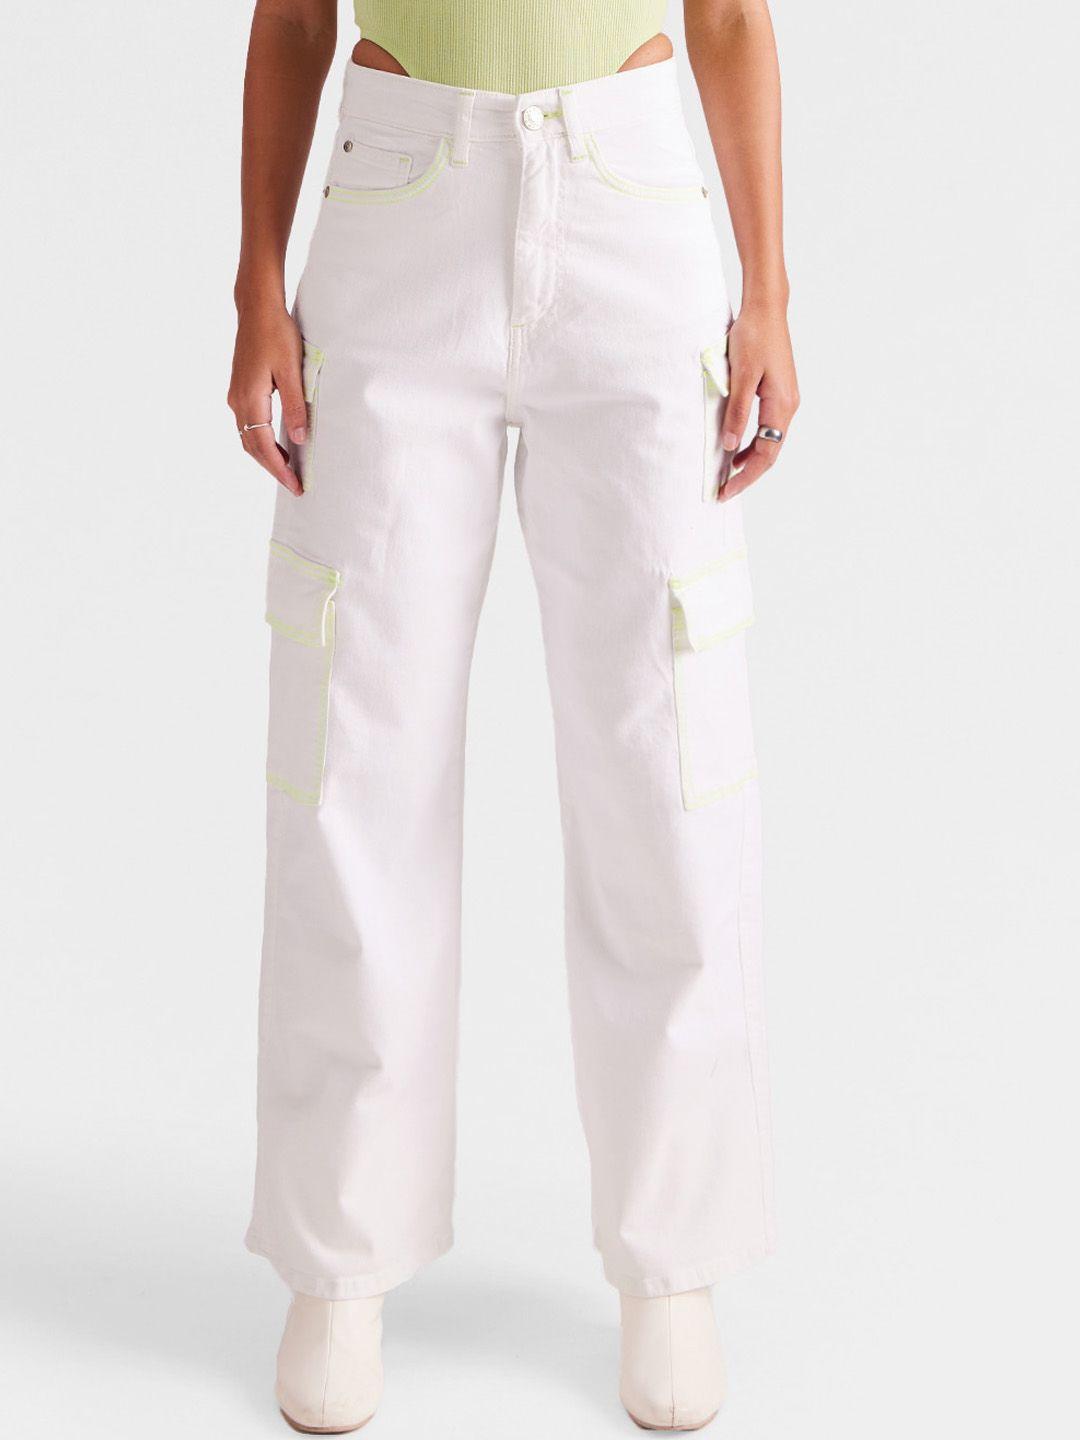 the souled store women white wide leg stretchable jeans